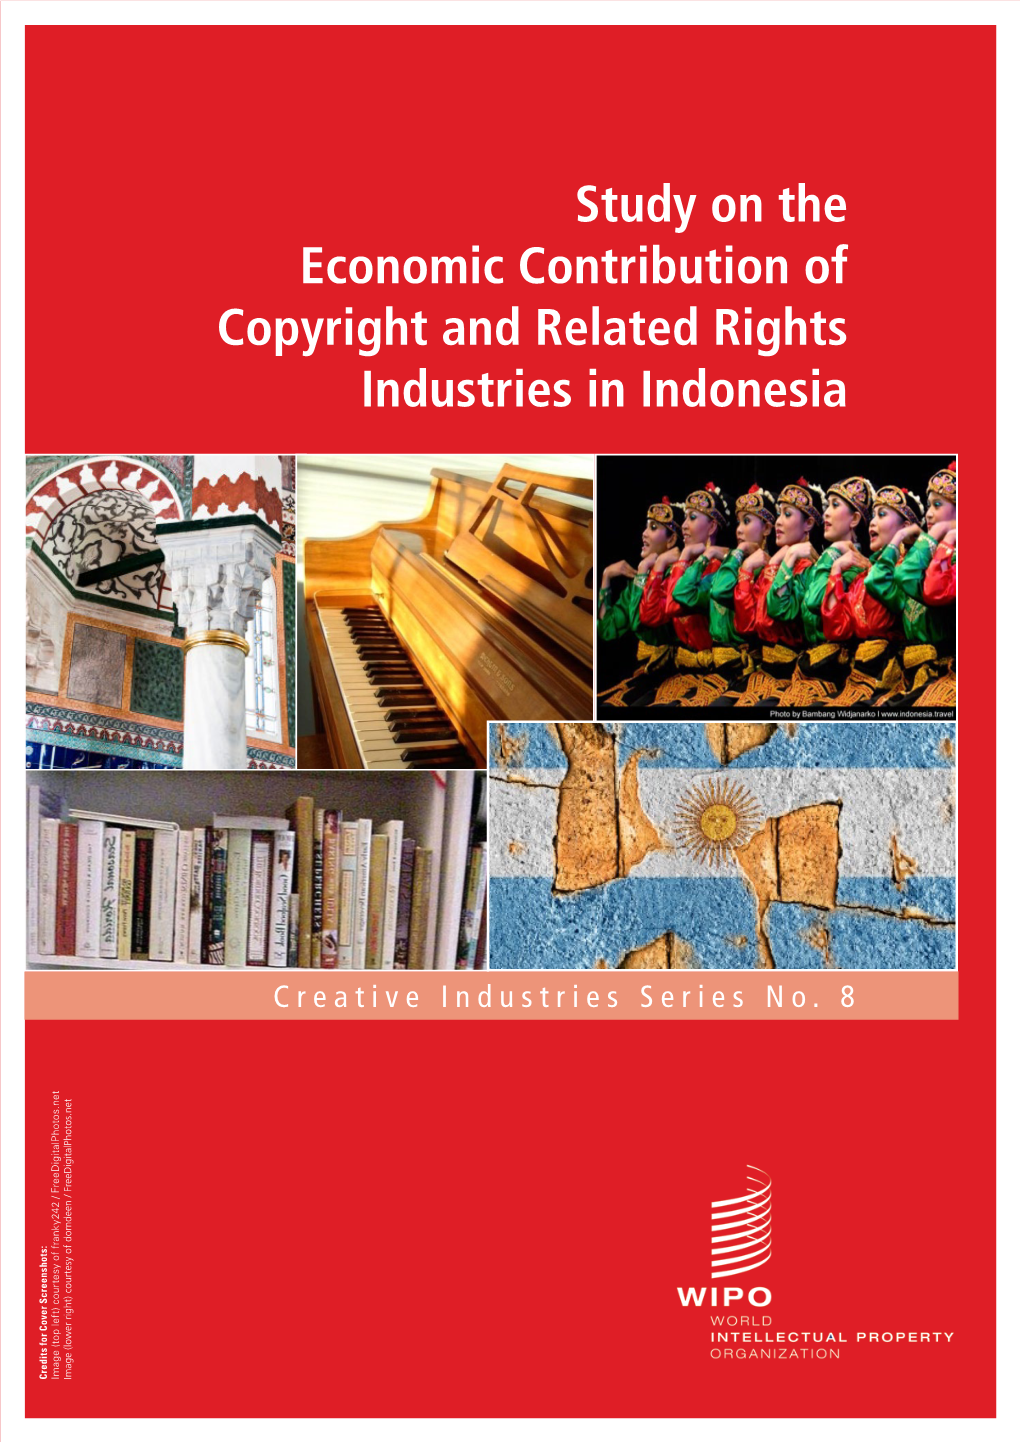 Study on the Economic Contribution of Copyright and Related Rights Industries in Indonesia